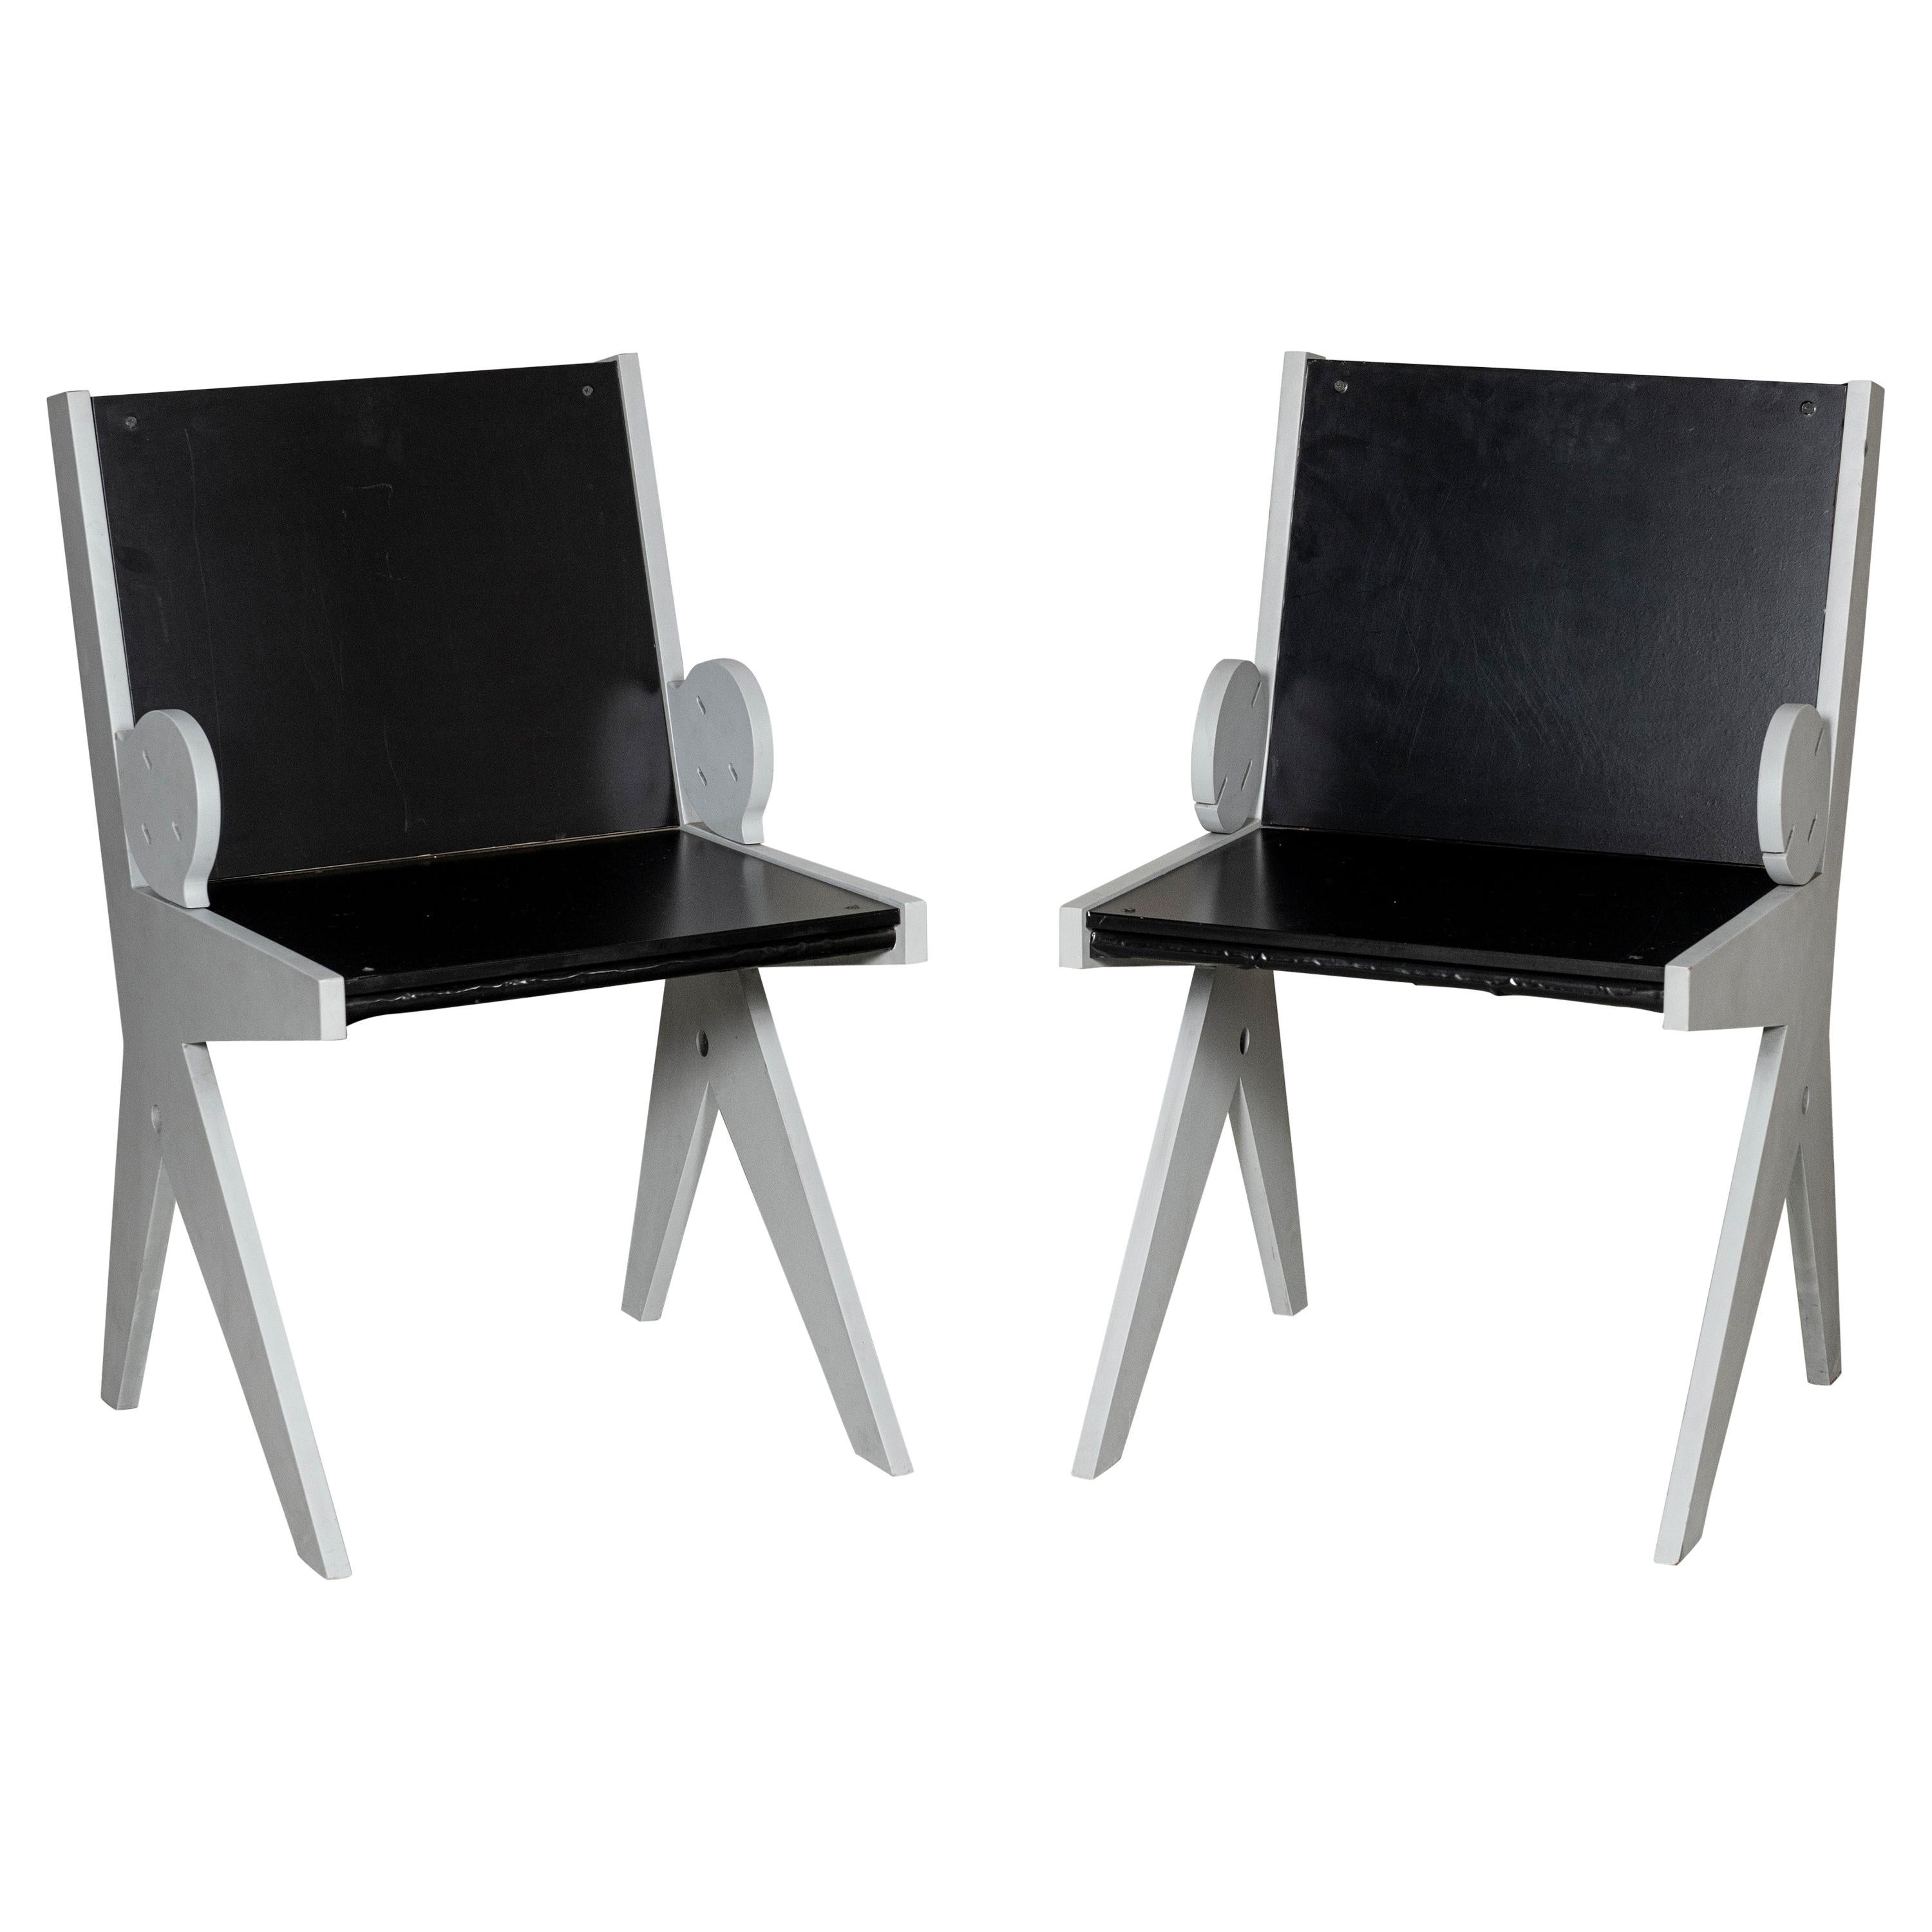 Pair of Painted Wood Side Chairs Titled "Friendly" by Ricardo Blanco, Argentina